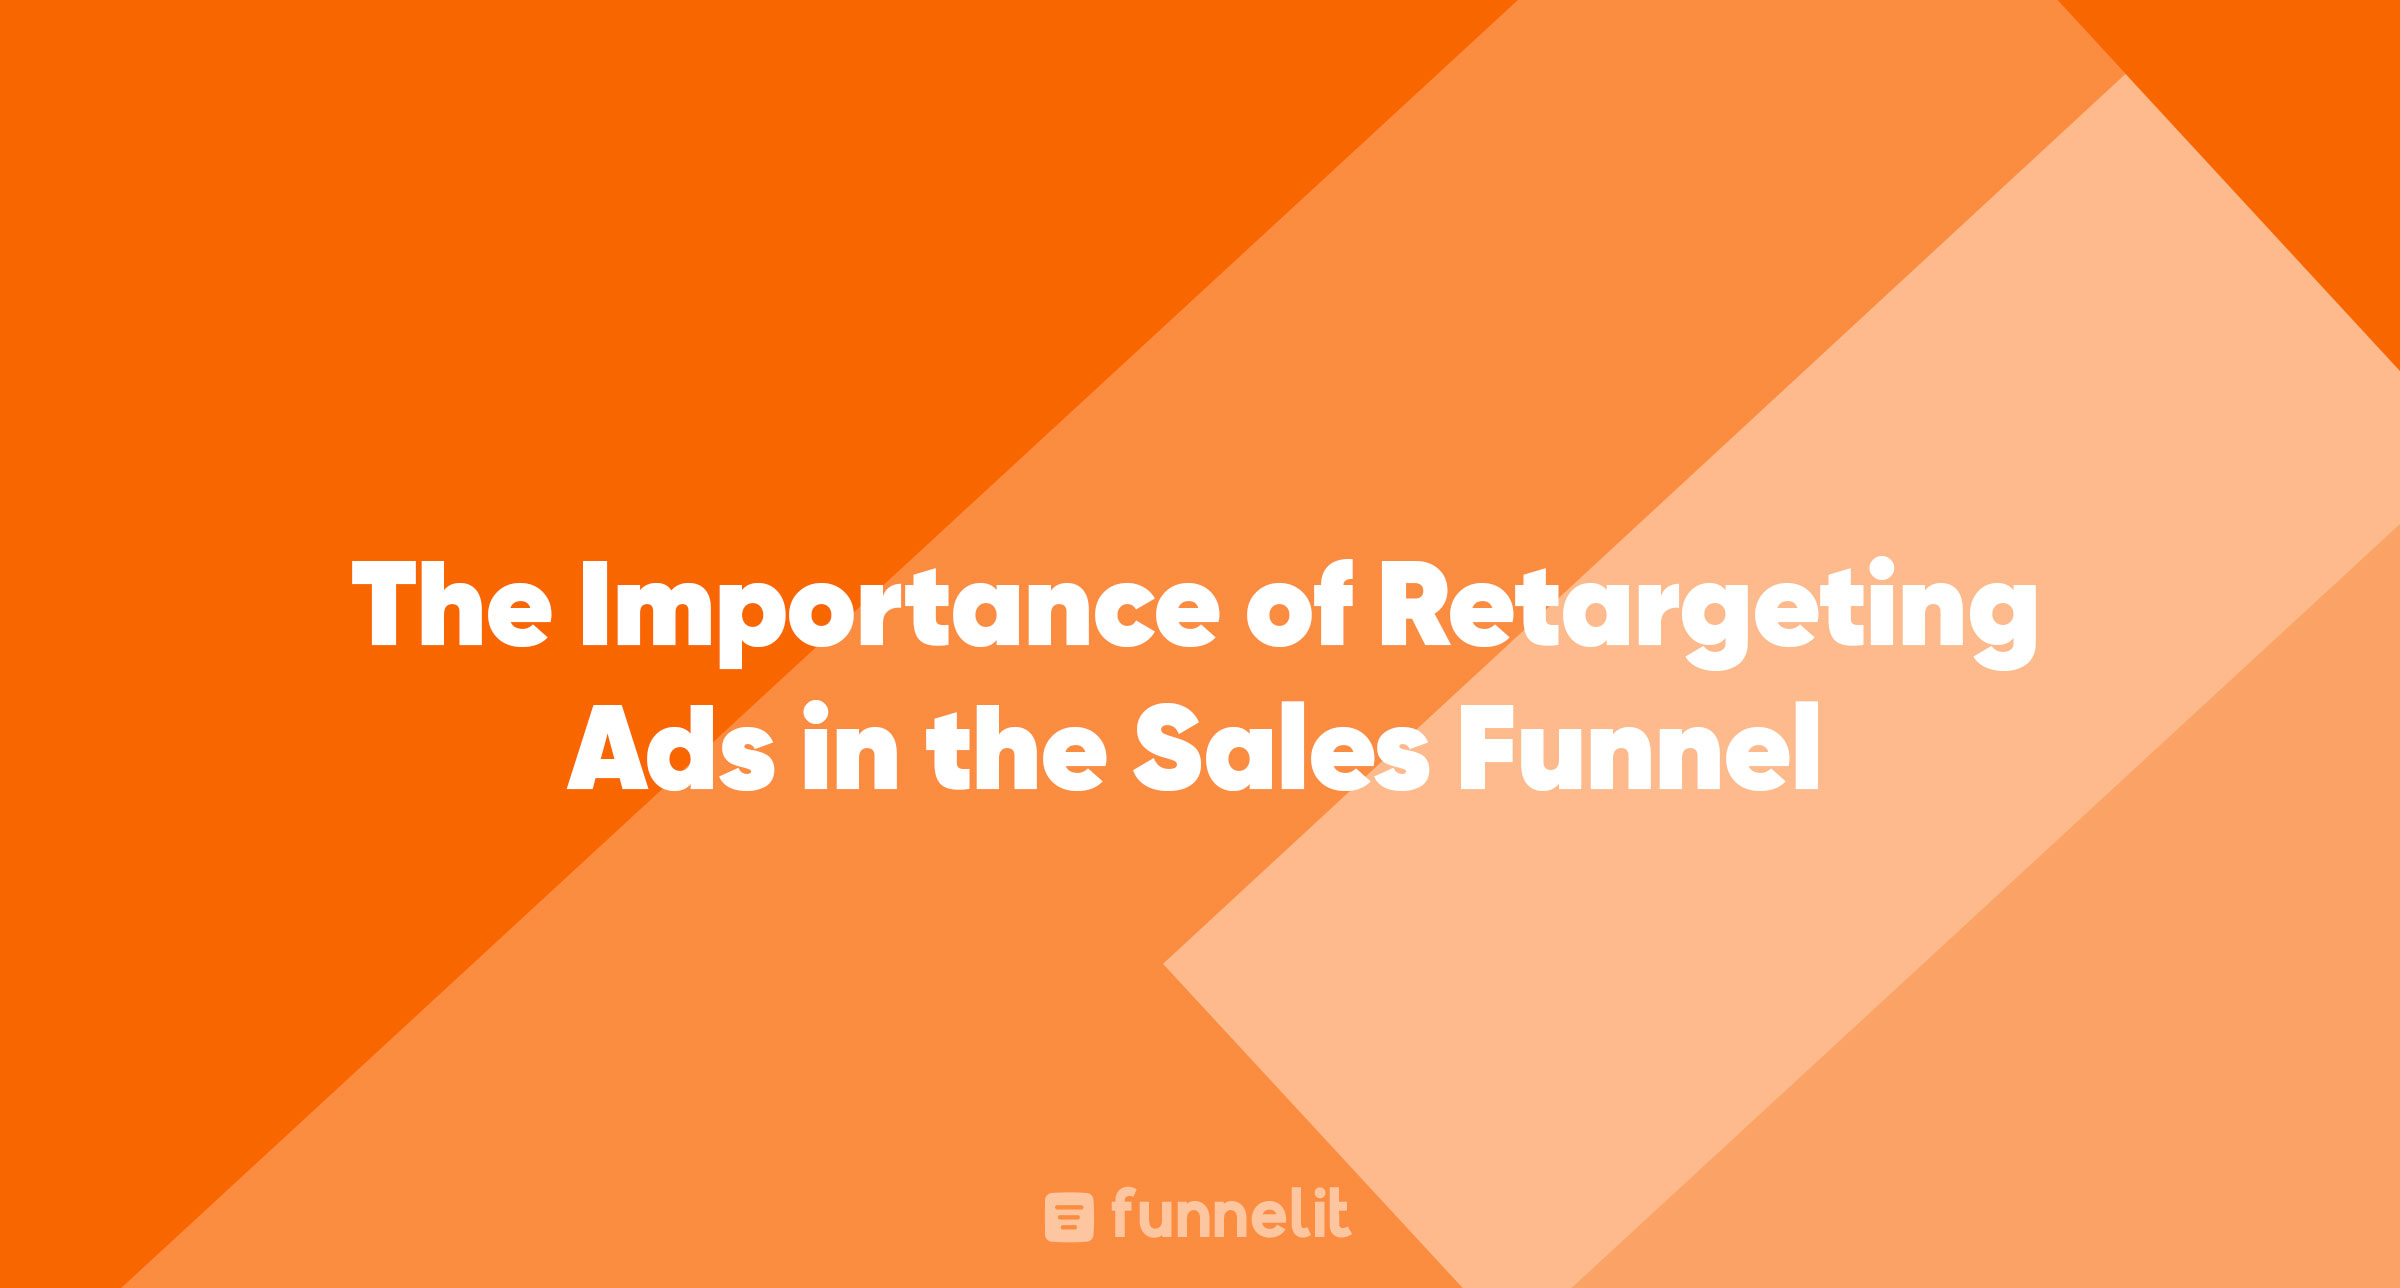 Article | The Importance of Retargeting Ads in the Sales Funnel